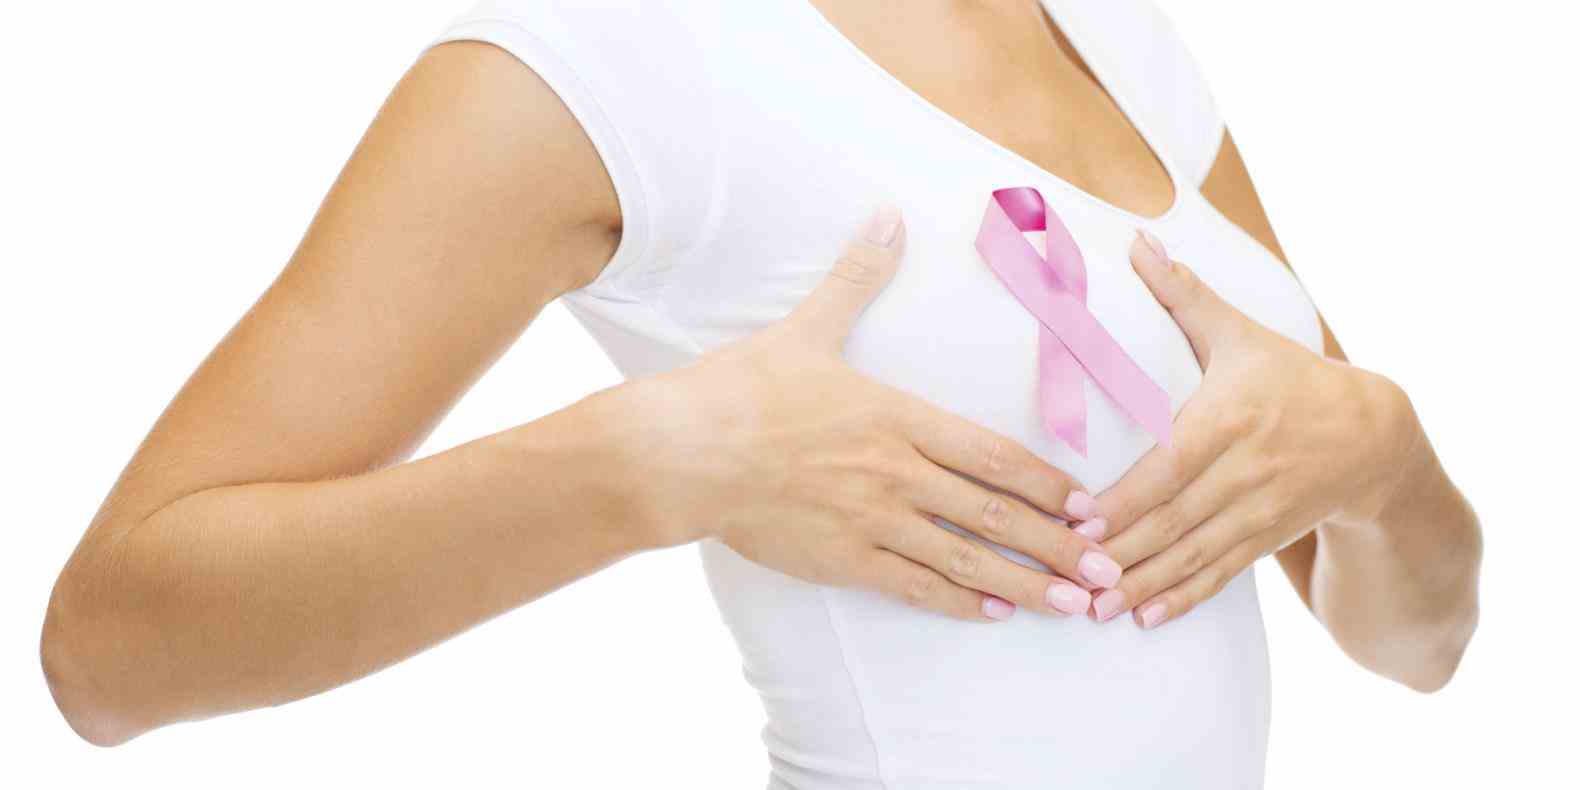 risk in for all women discover more key facts about cancer 